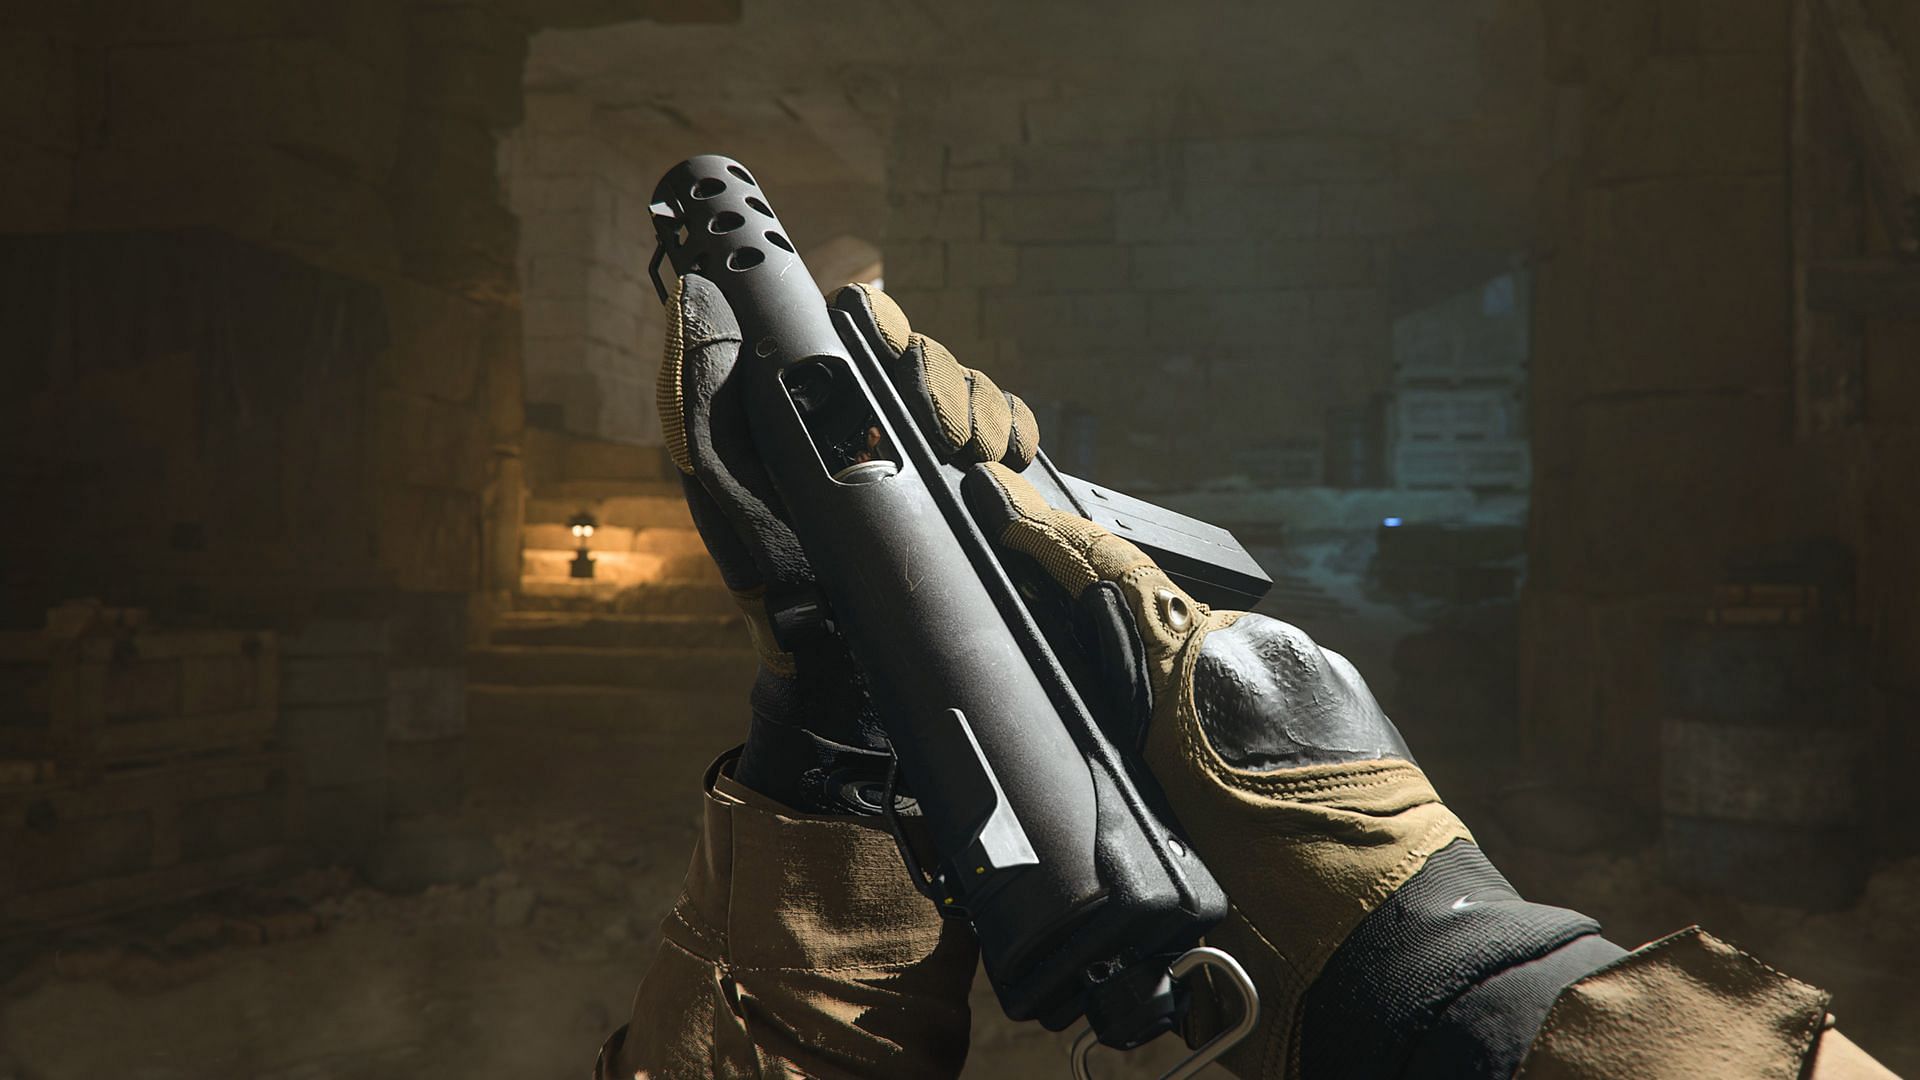 Best Warzone 2 loadout and tuning for FTAC Siege in Season 3 Reloaded (Image via Activision)